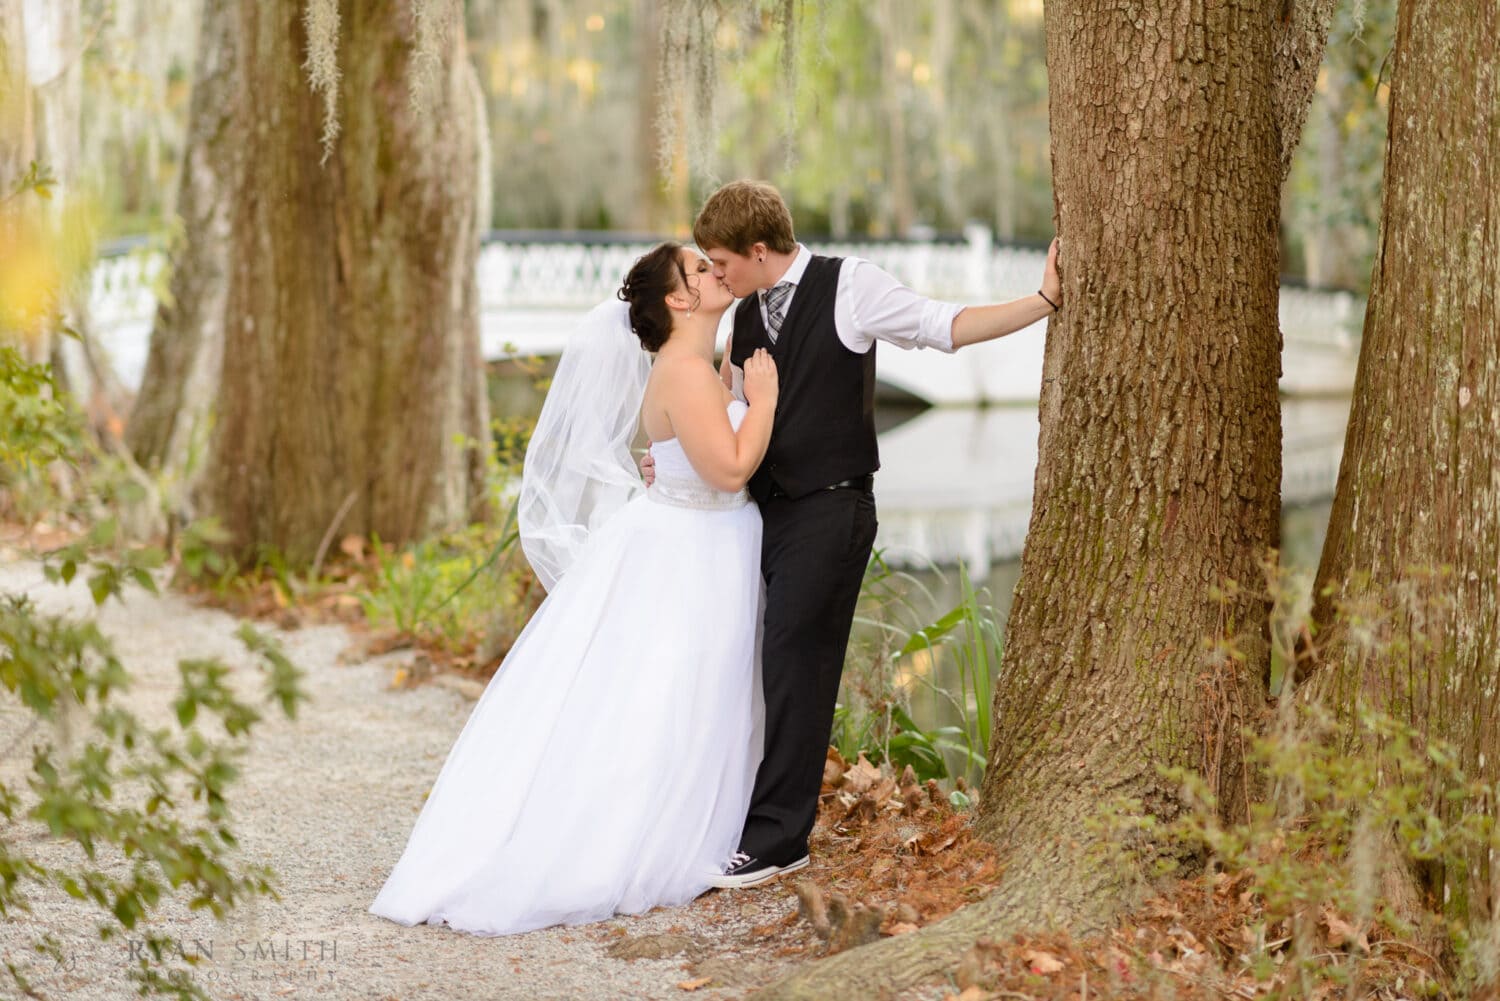 KIss with the white bridge in the background - Magnolia Plantation